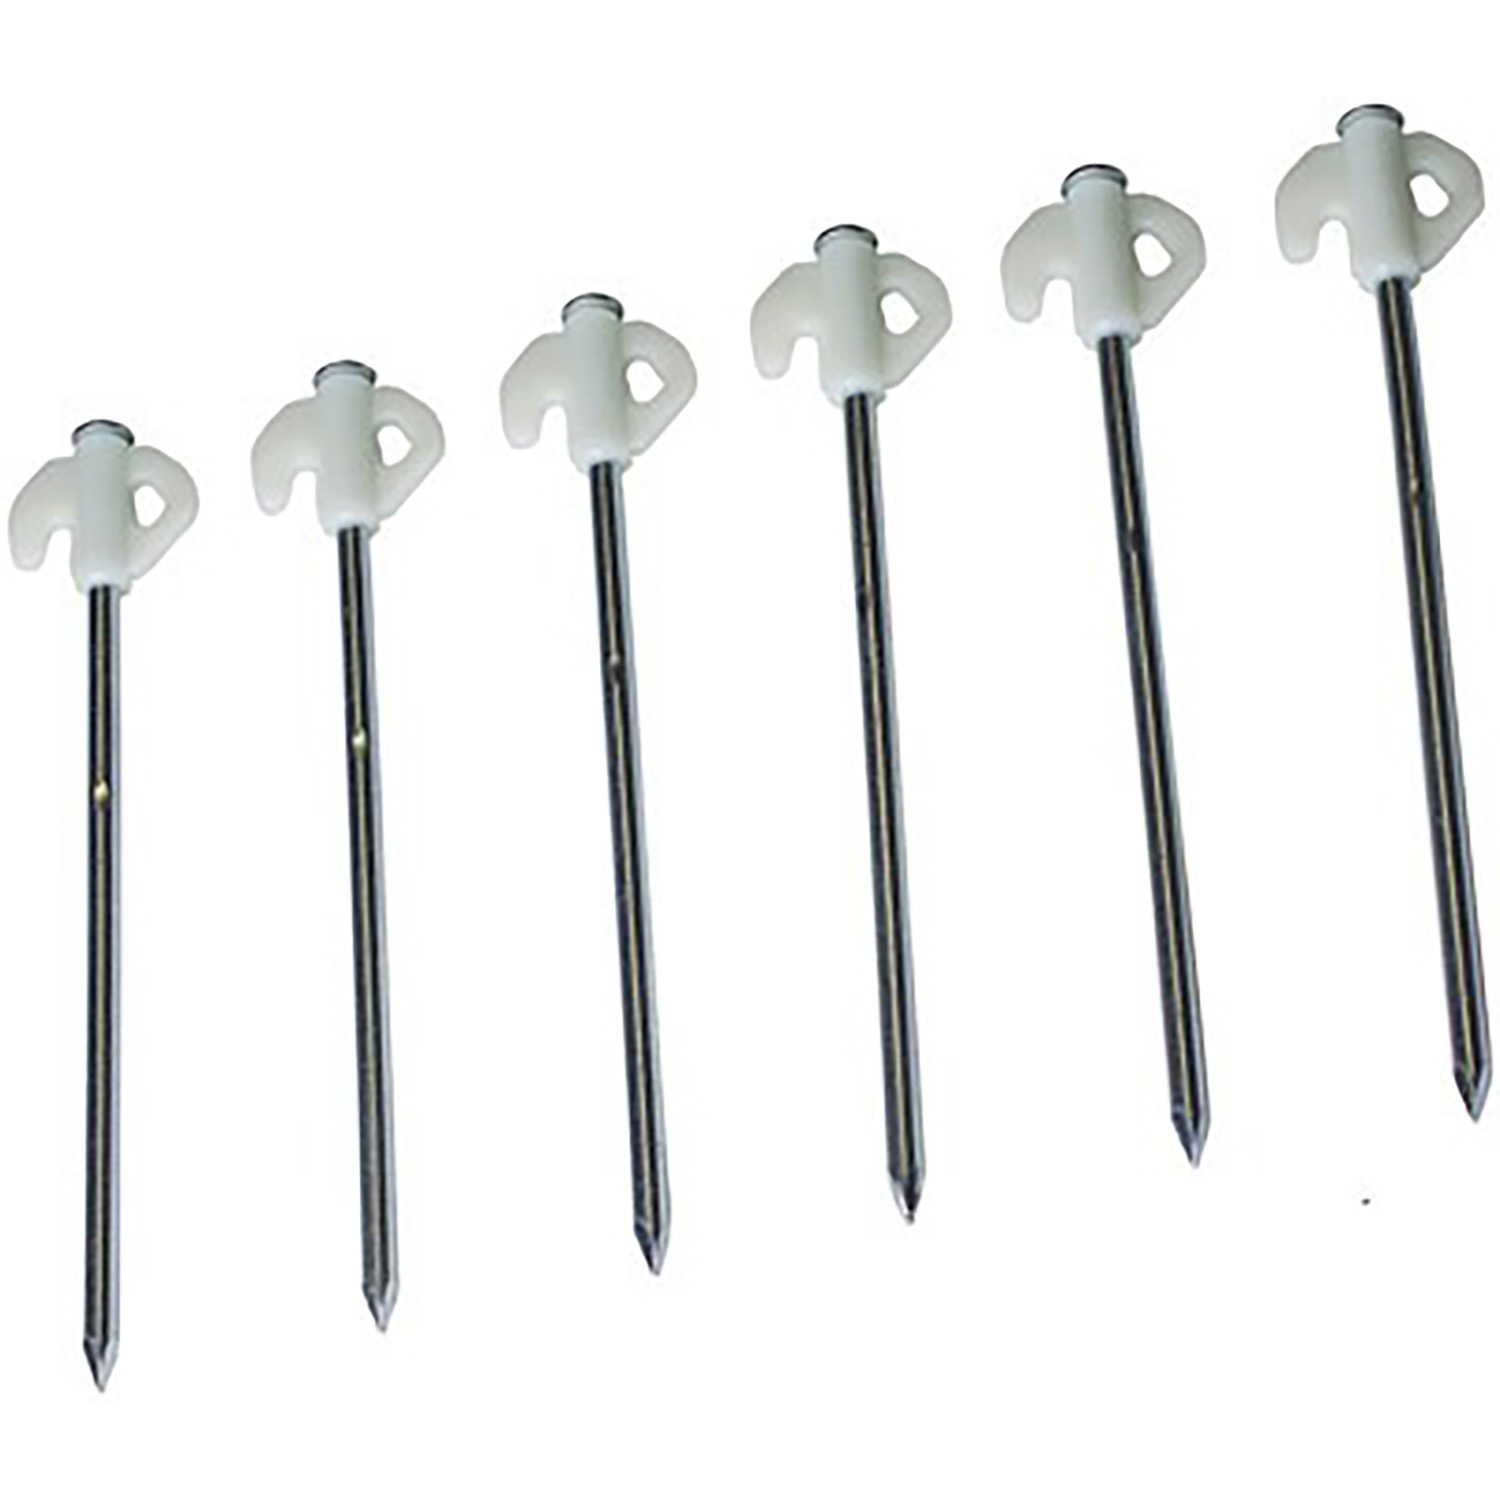 World Famous - Glow top tent pegs, 6 pcs